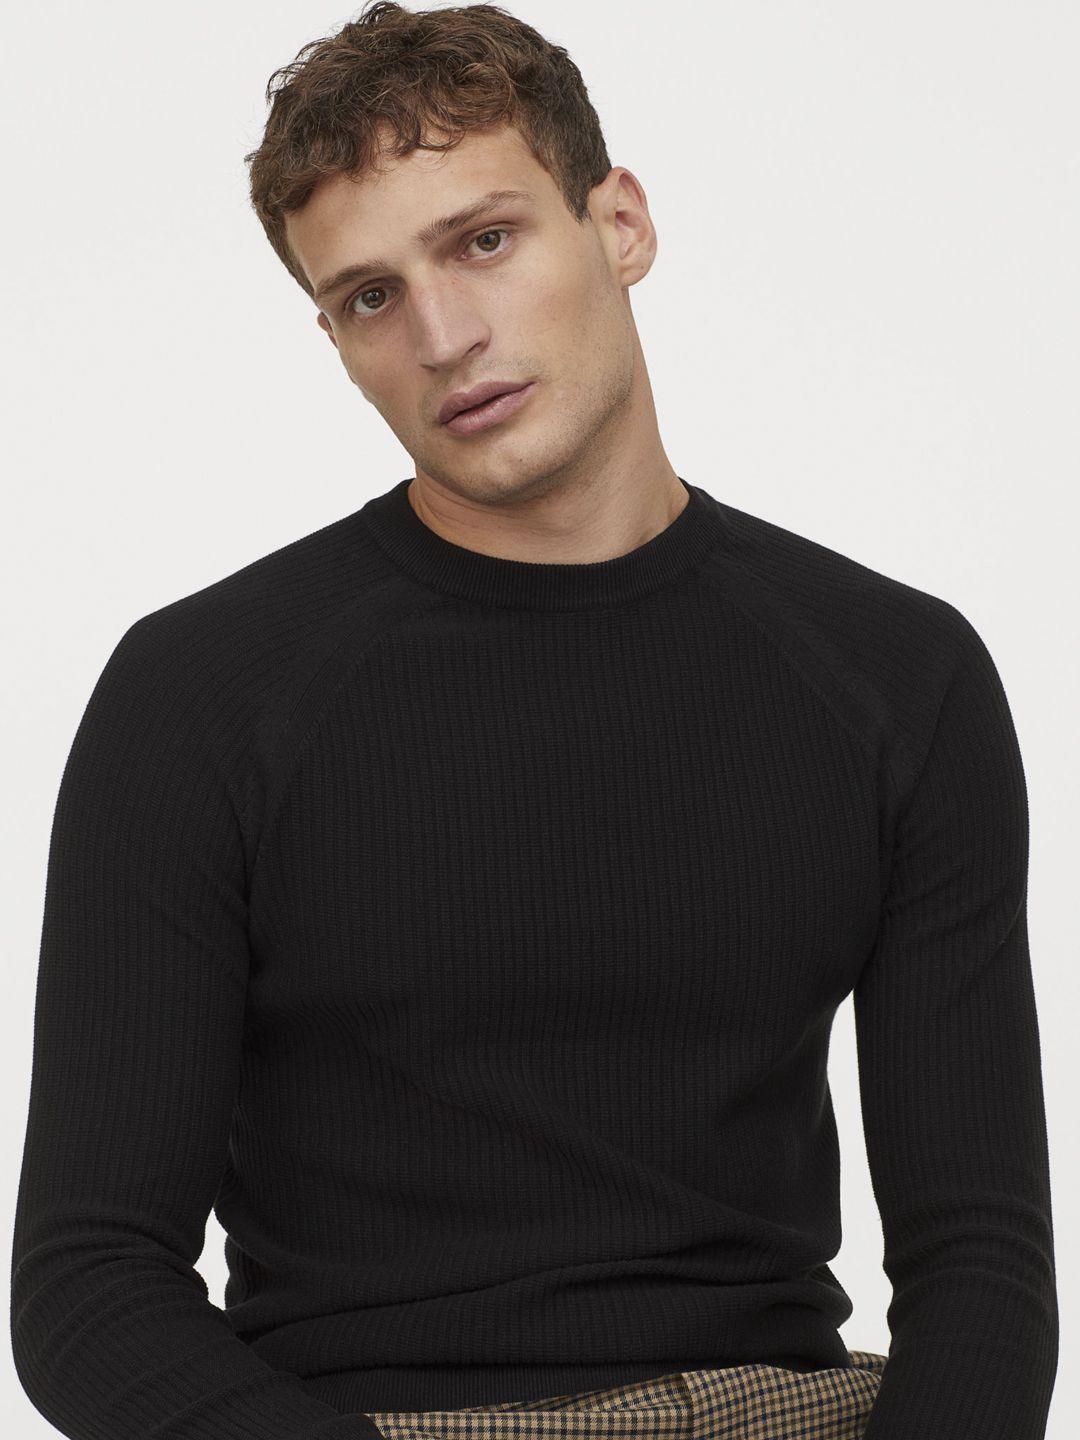 h&m-men-black-solid-knitted-jumper-muscle-fit